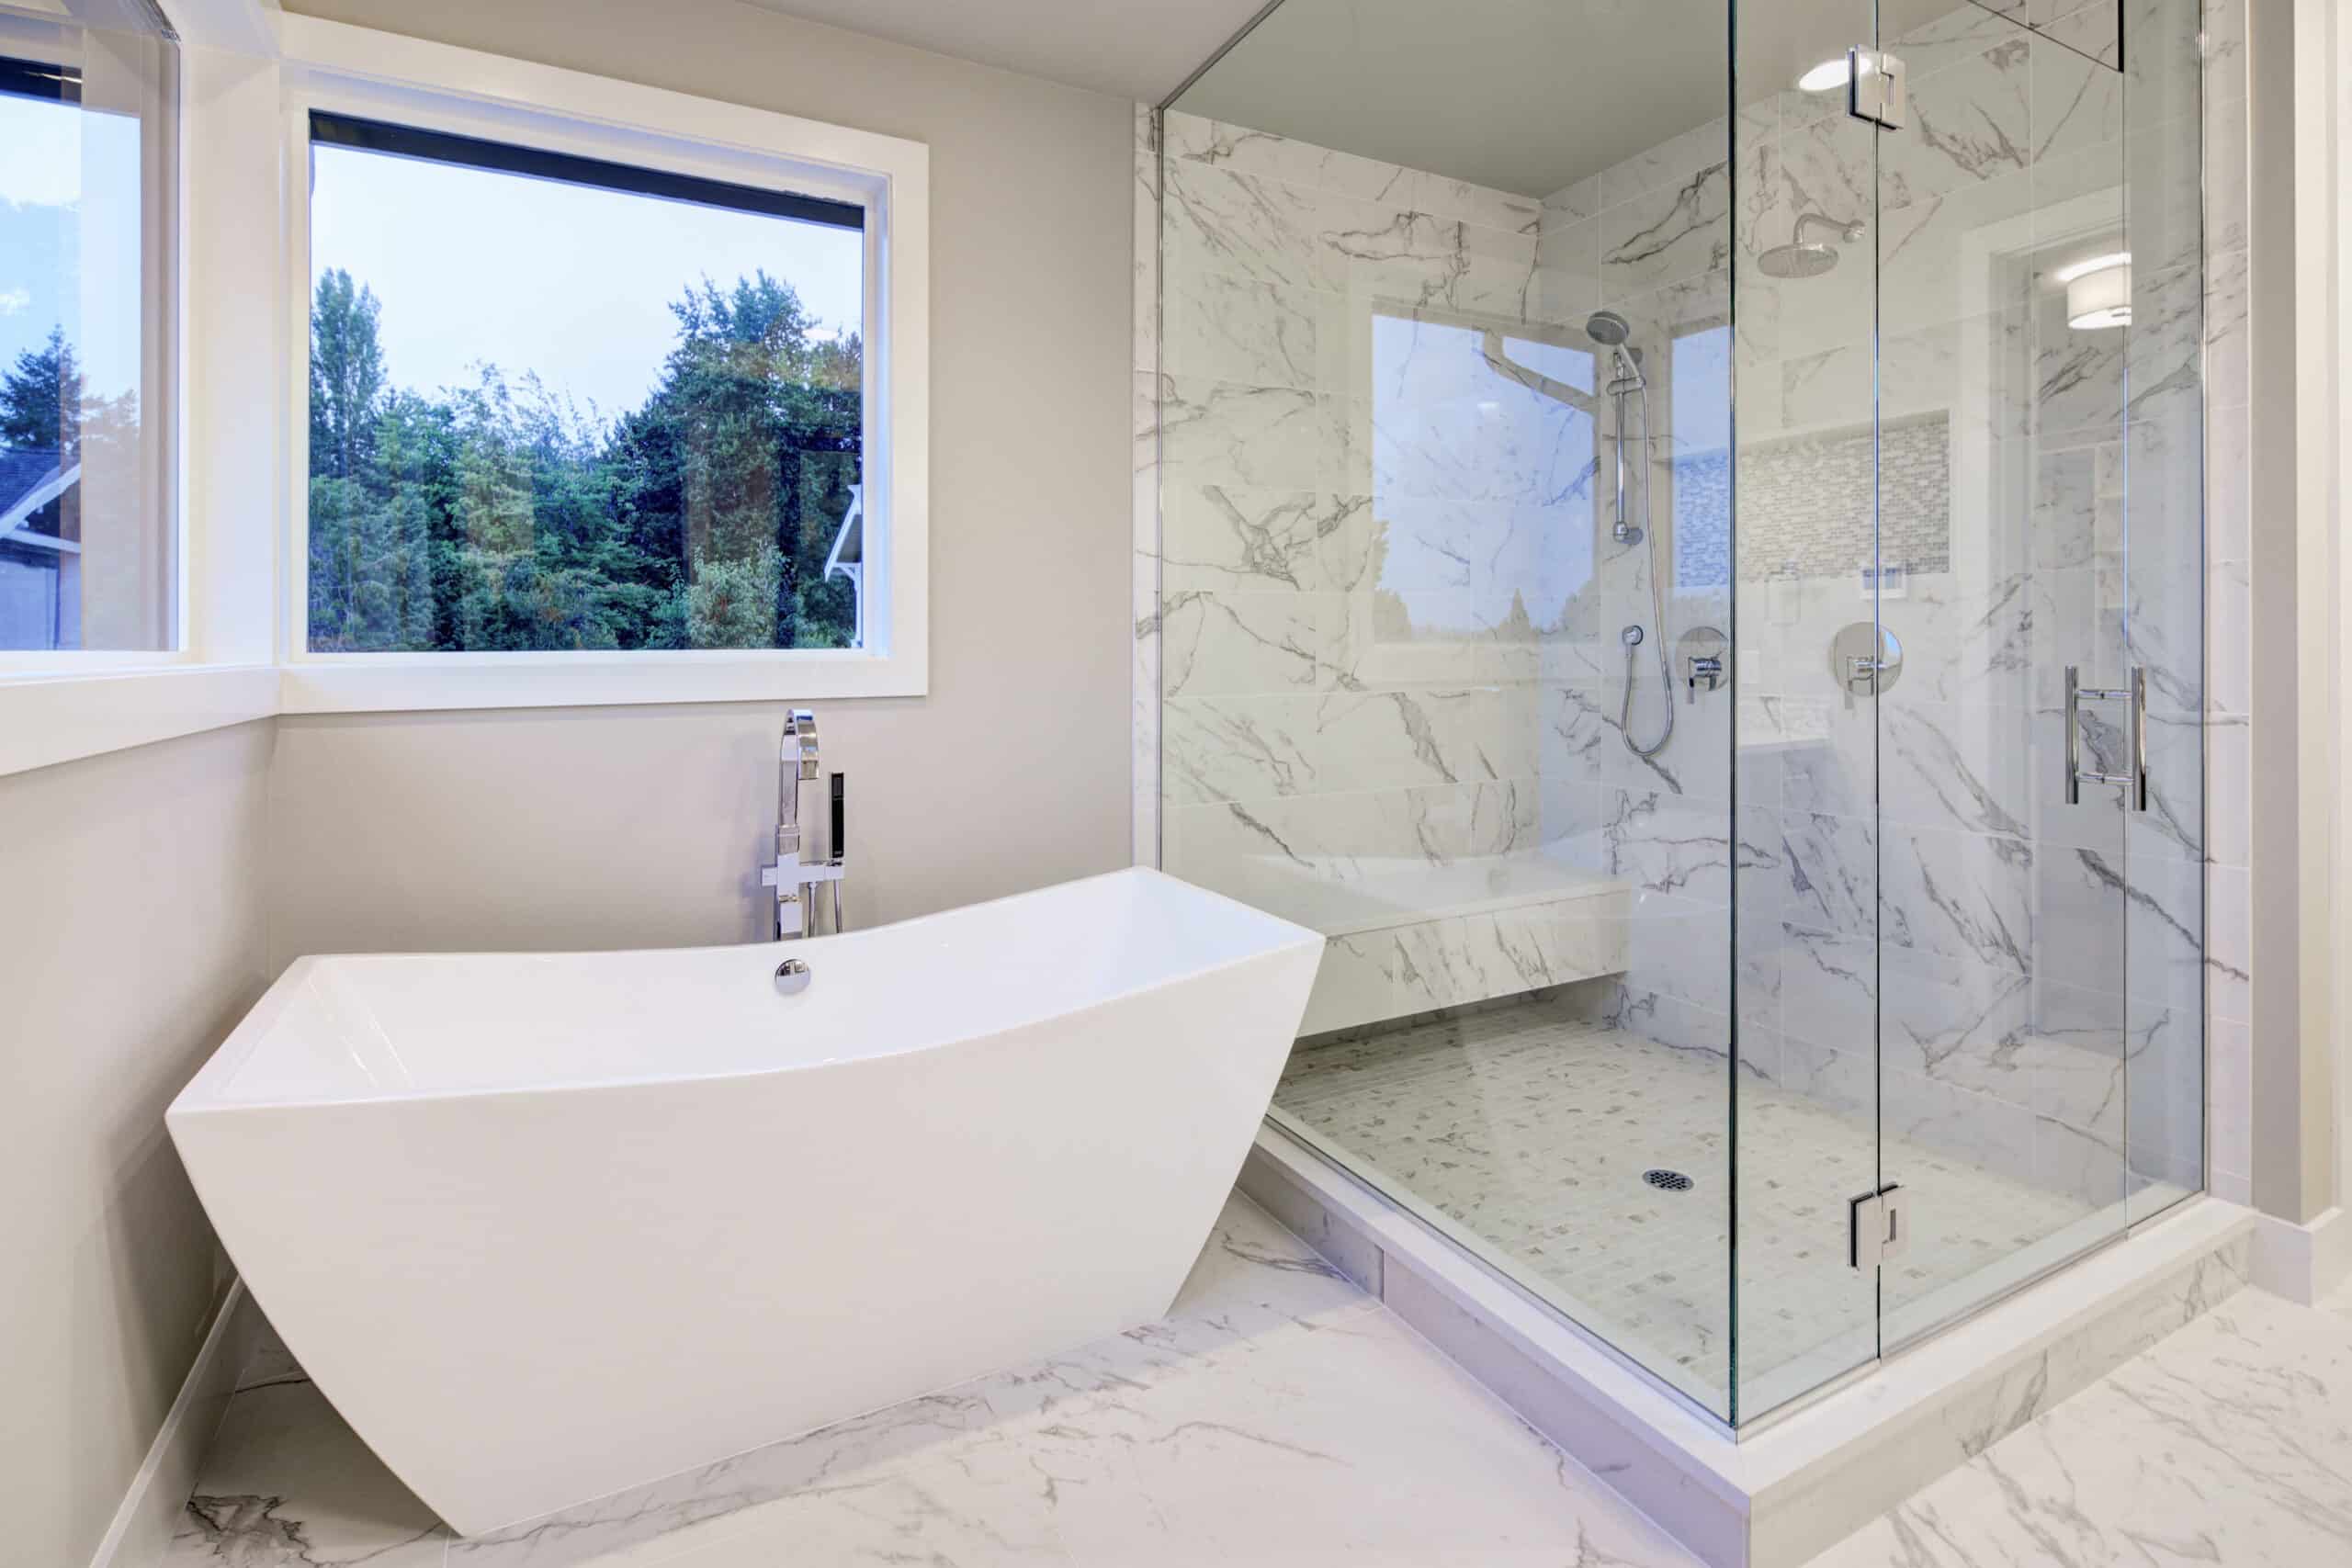 Sleek bathroom features freestanding bathtub atop marble floor placed in front of glass shower accented with rain shower head and gray and white marble surround. Northwest, USA